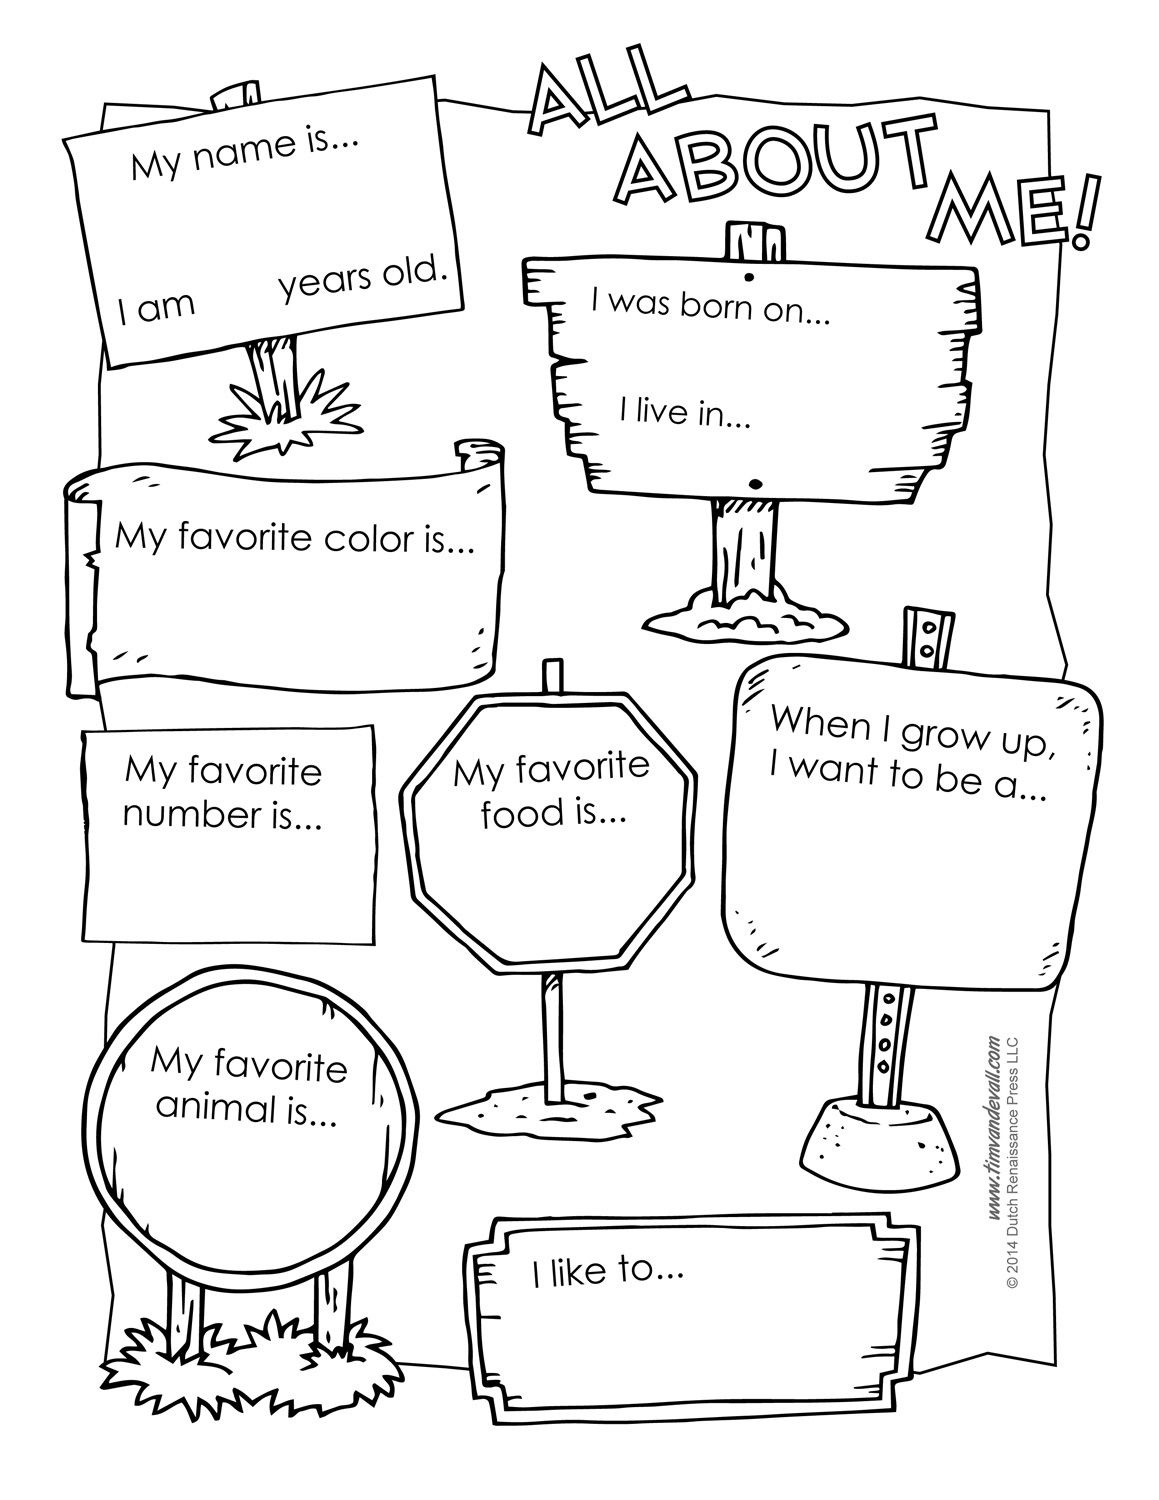 All About Me Preschool Template | 6 Best Images Of All About Me - Free Printable All About Me Poster